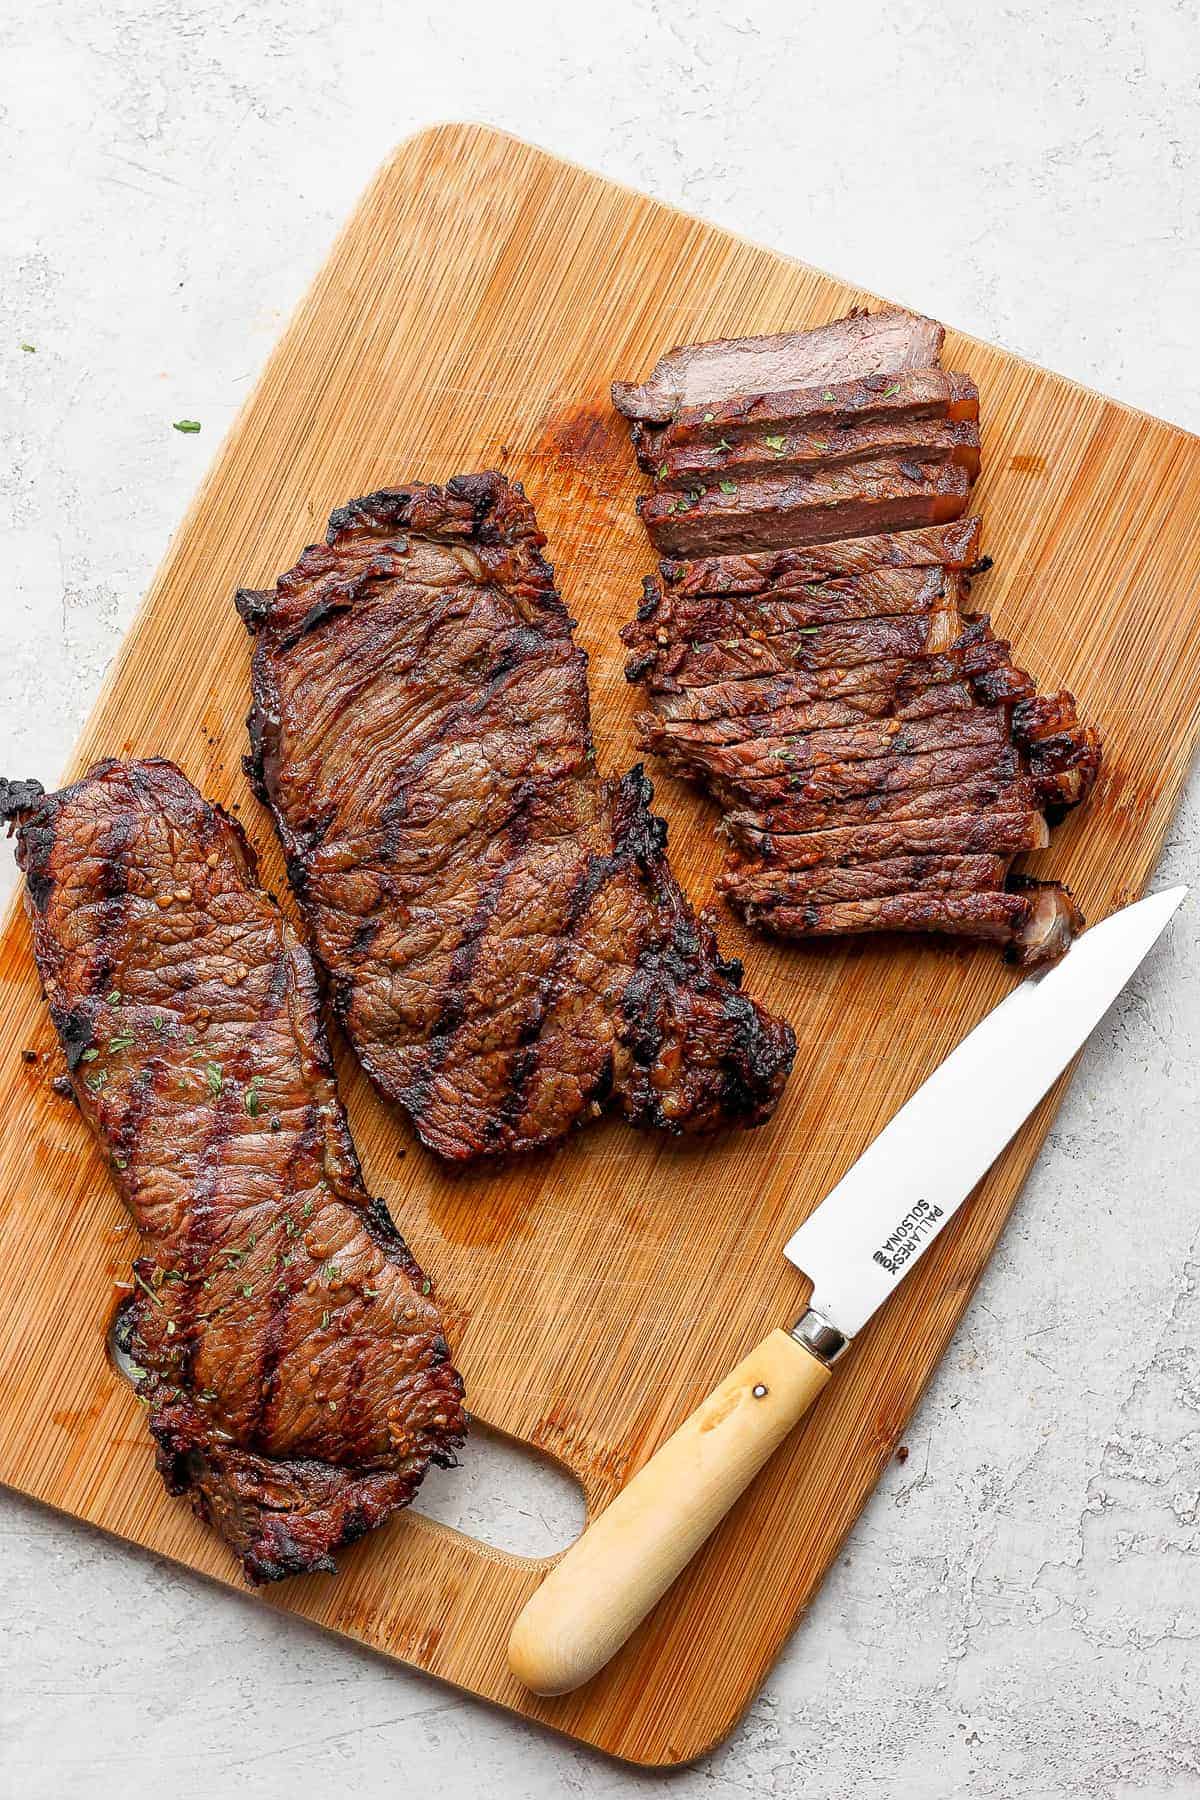 sliced cooked steak on cutting board.